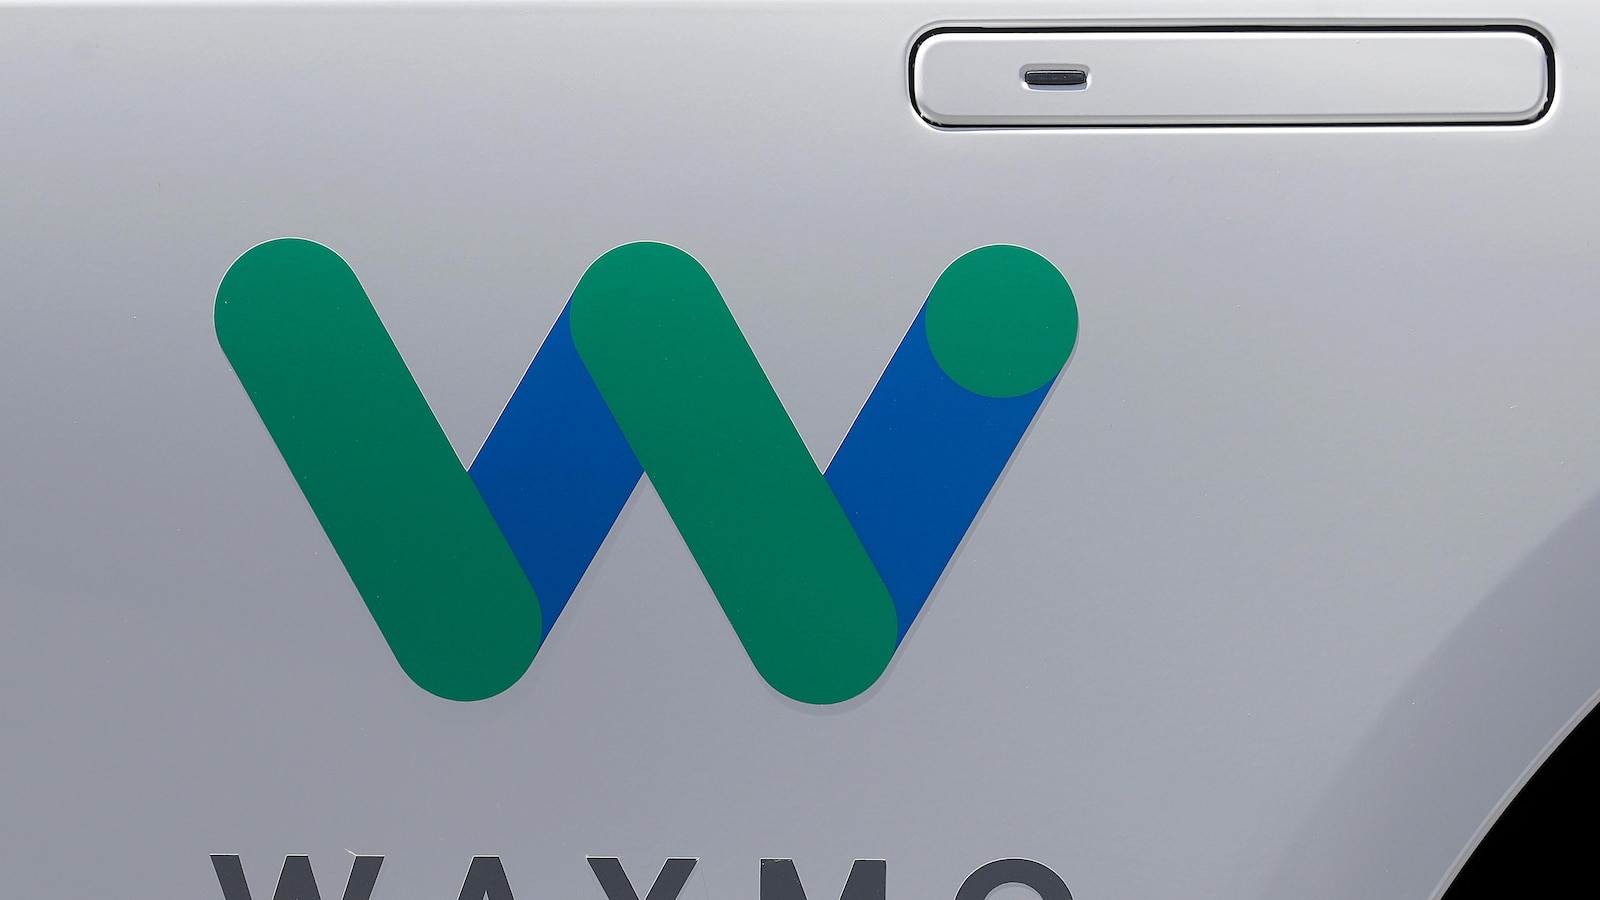 Waymo recalls vehicles following two incidents involving collision with a pickup truck